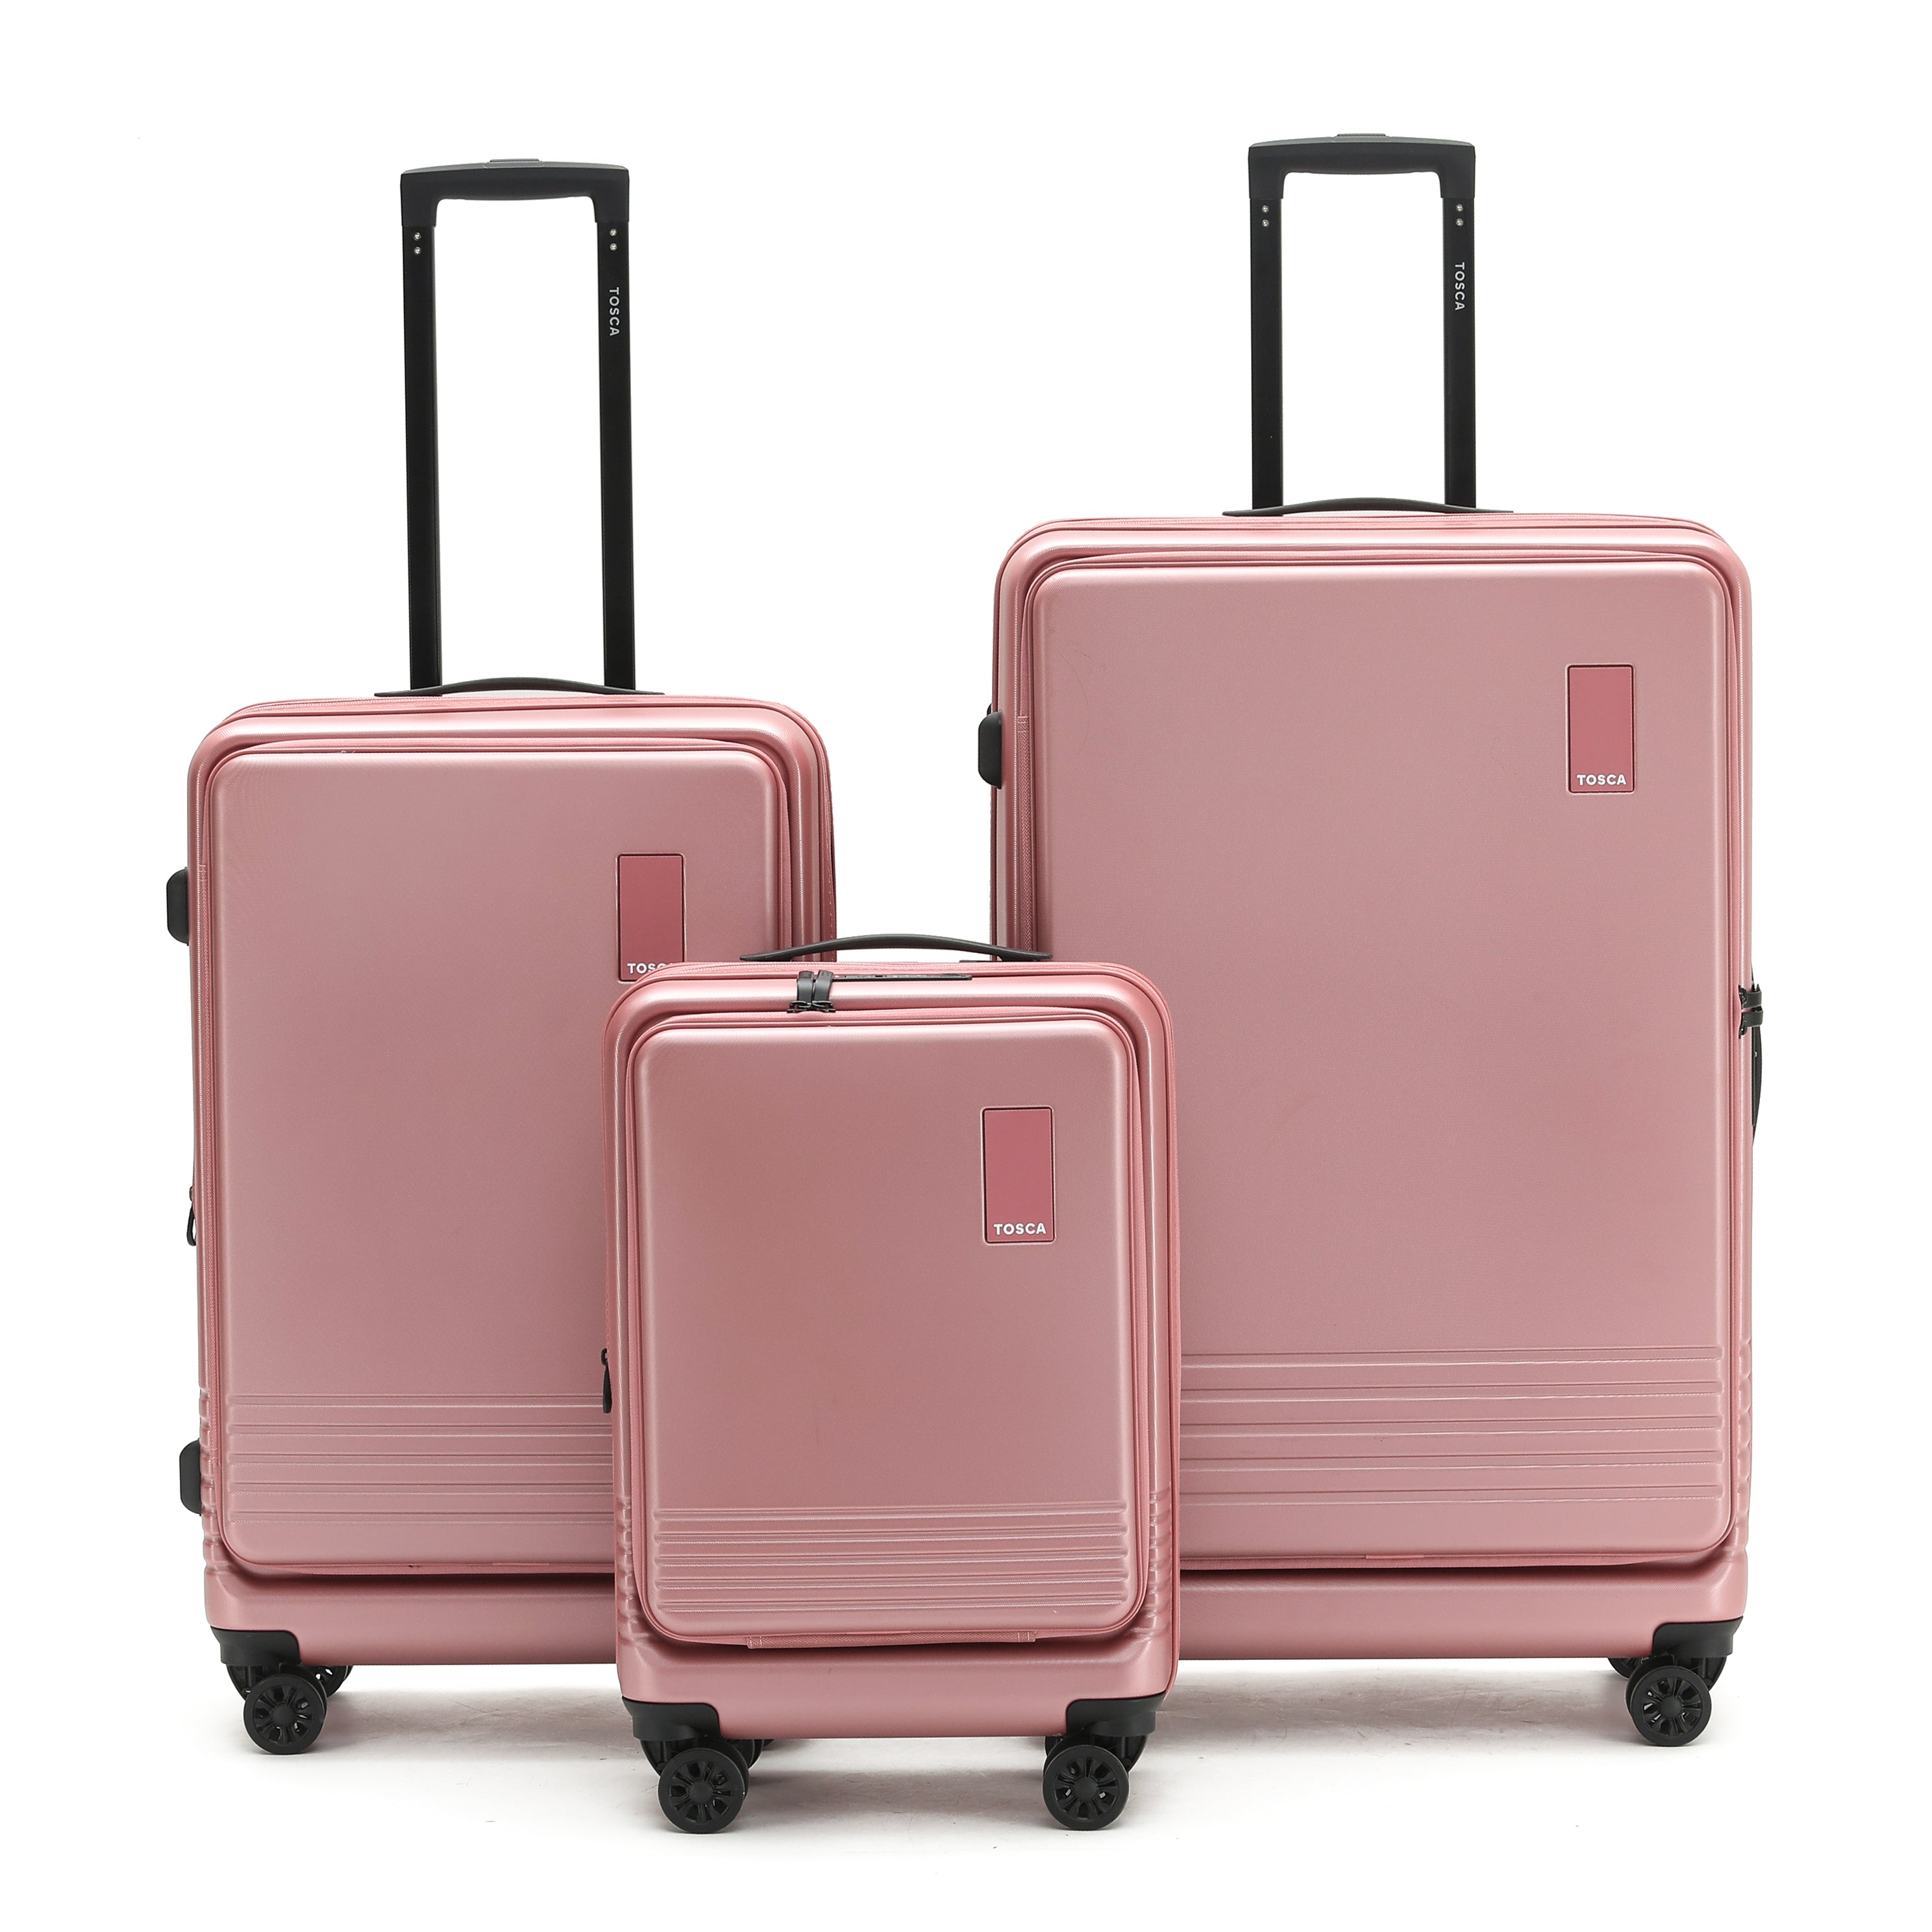 Tosca - TCA644 Horizon Front lid opening Set of 3 suitcases - Dusty Rose-1